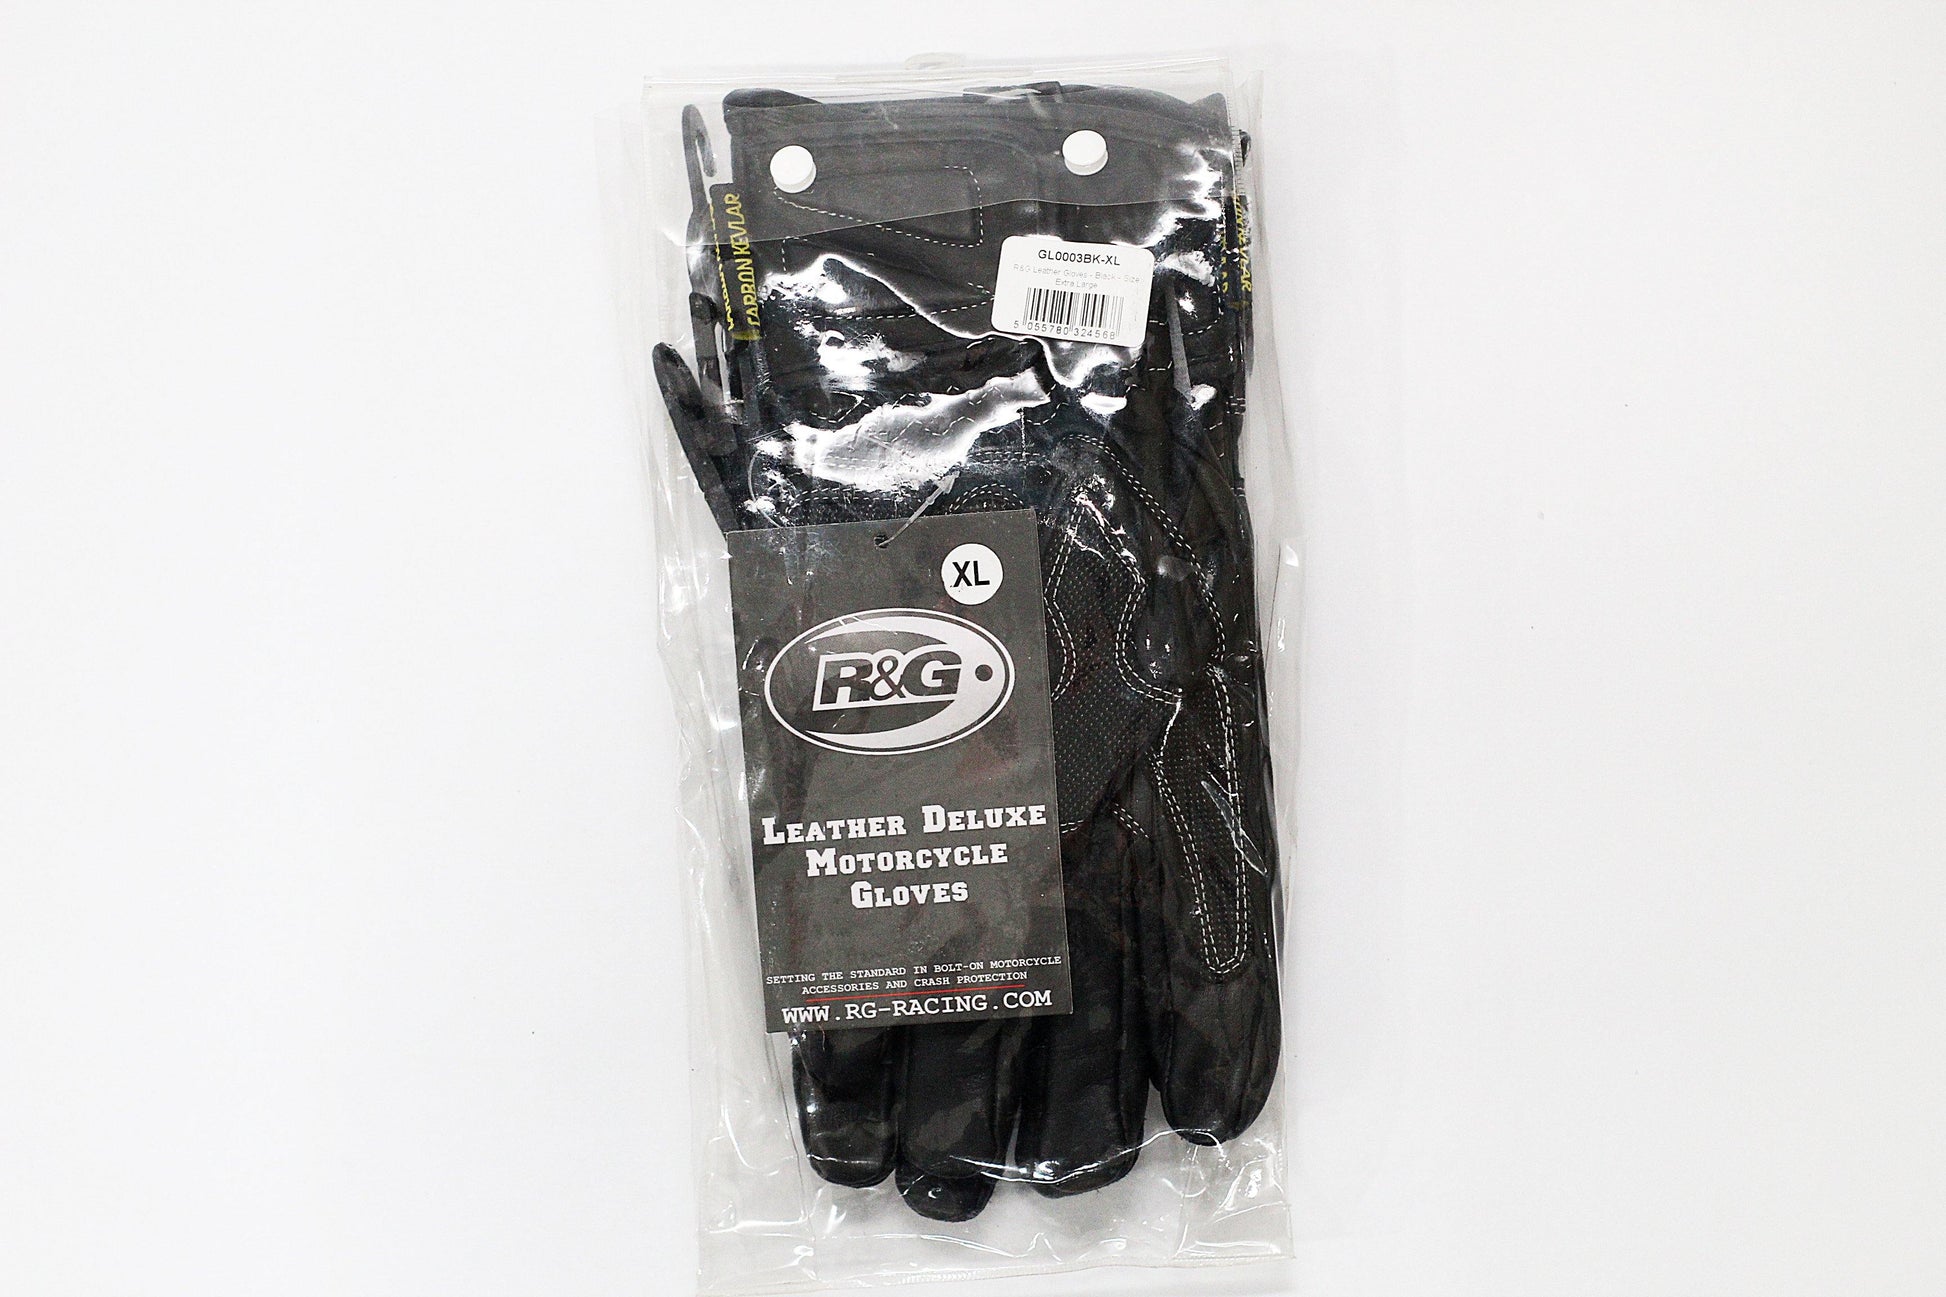 R&G Leather Deluxe Motorcycle Gloves (Black) - Durian Bikers